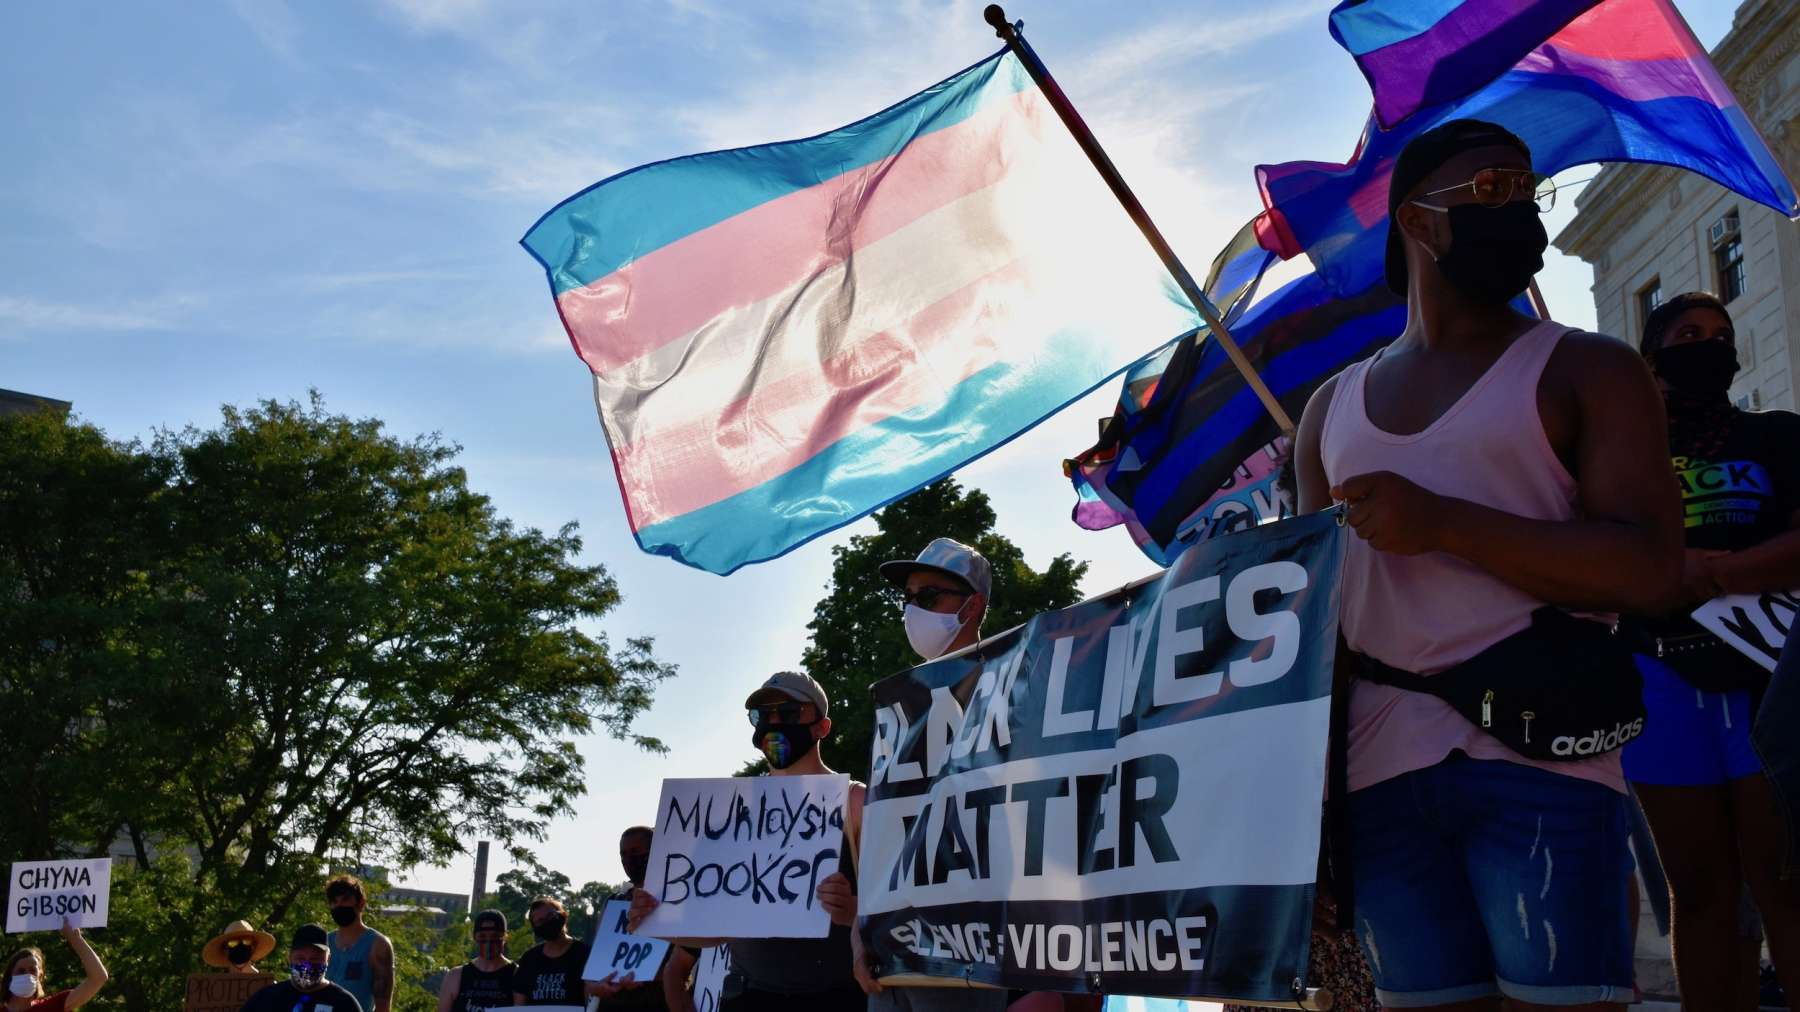 Rhode Island Pride marches for Black and Trans lives